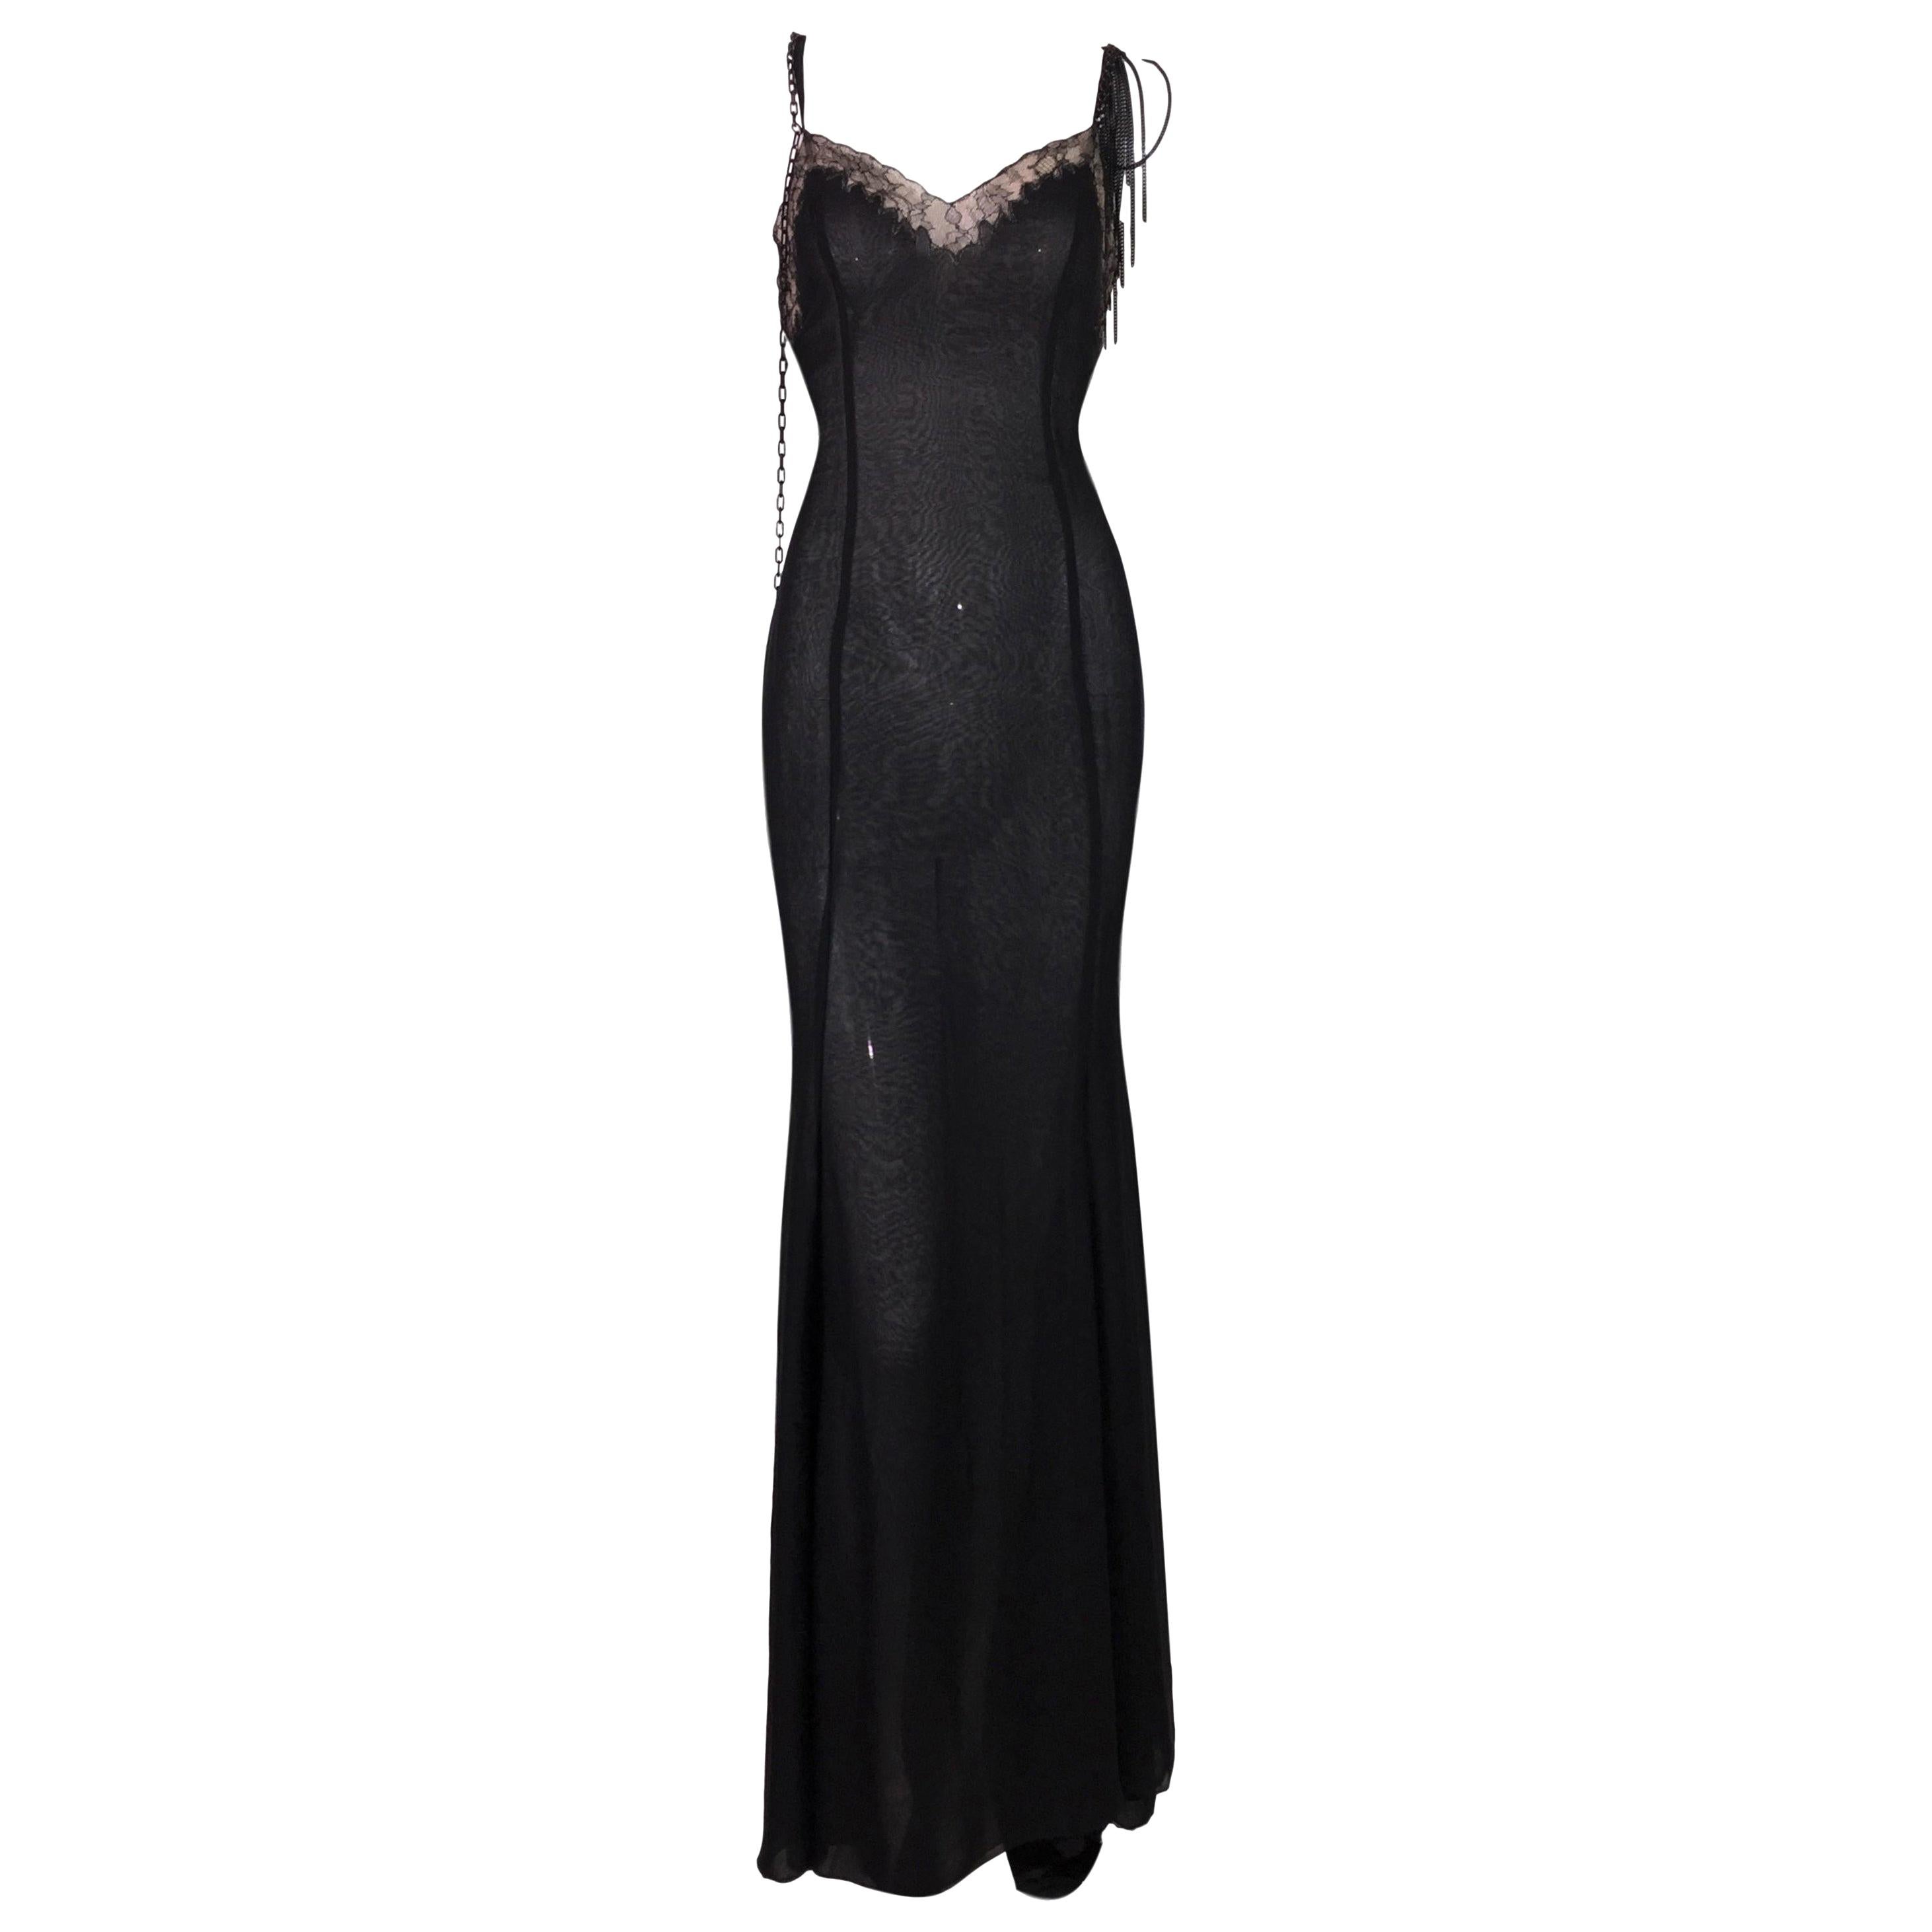 2004 Versace Black Sheer Plunging Chain Embellished Gown Dress w Train